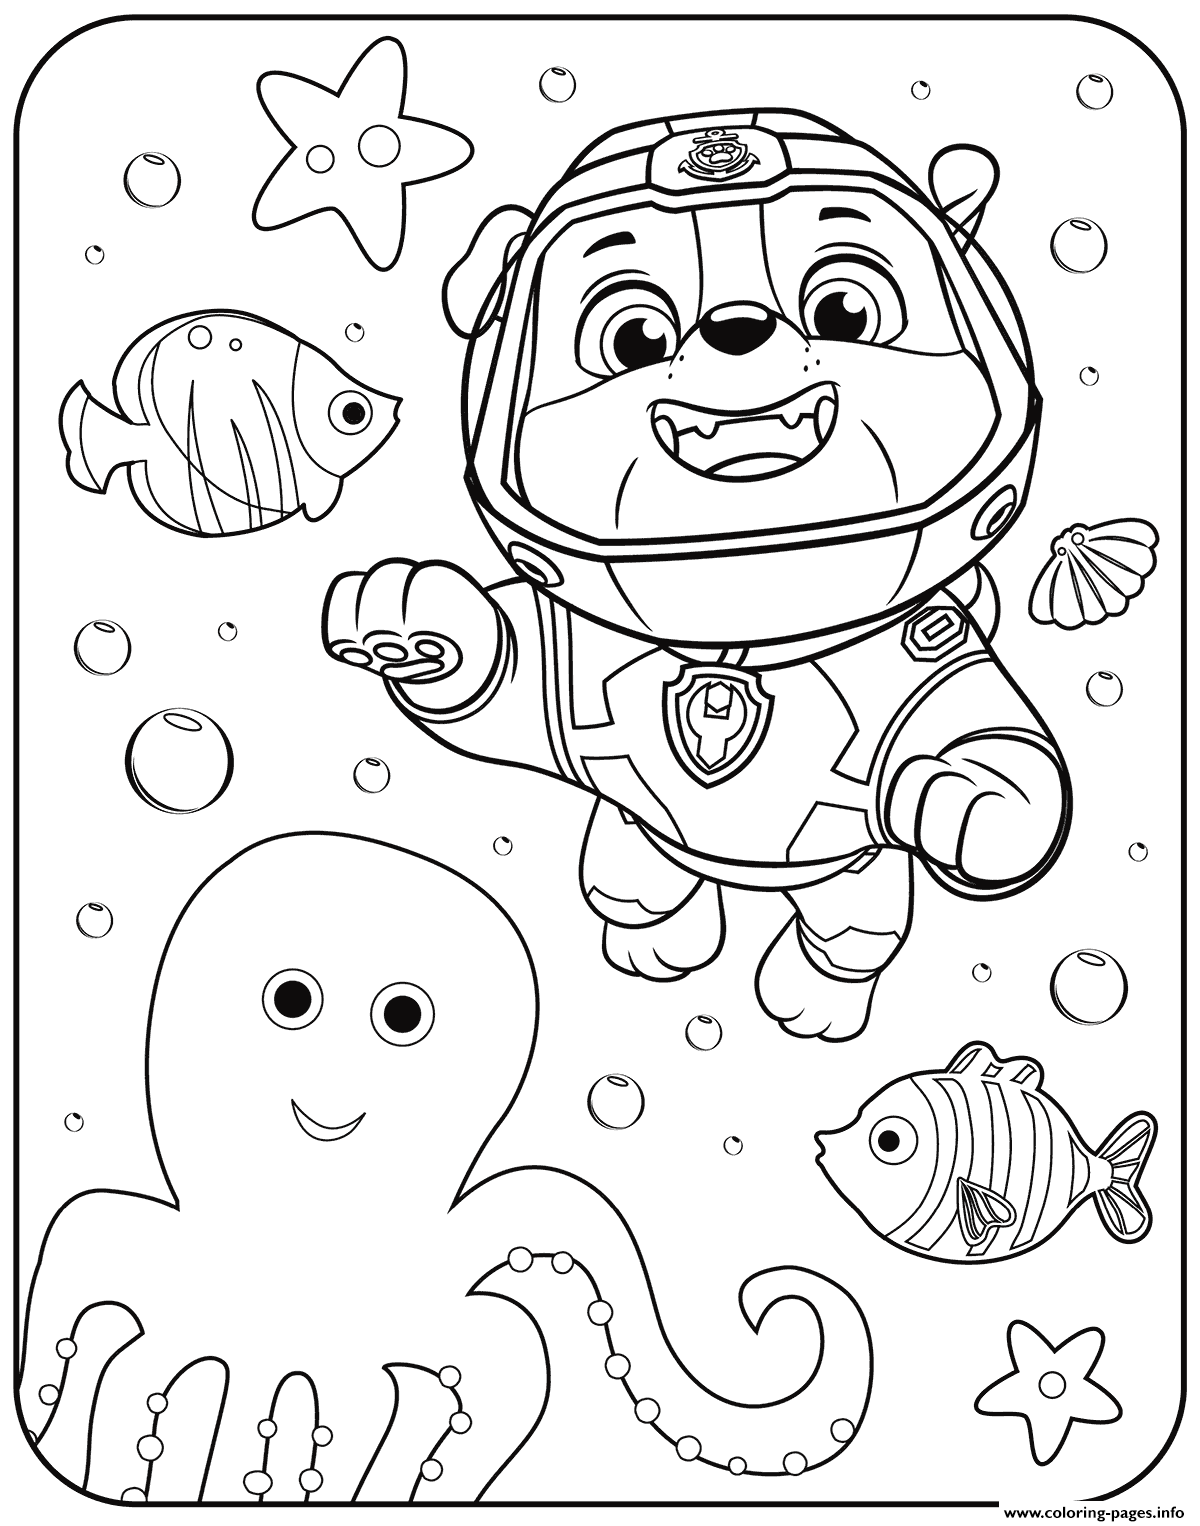 Paw Patrol Coloring Pages FREE Printable 123